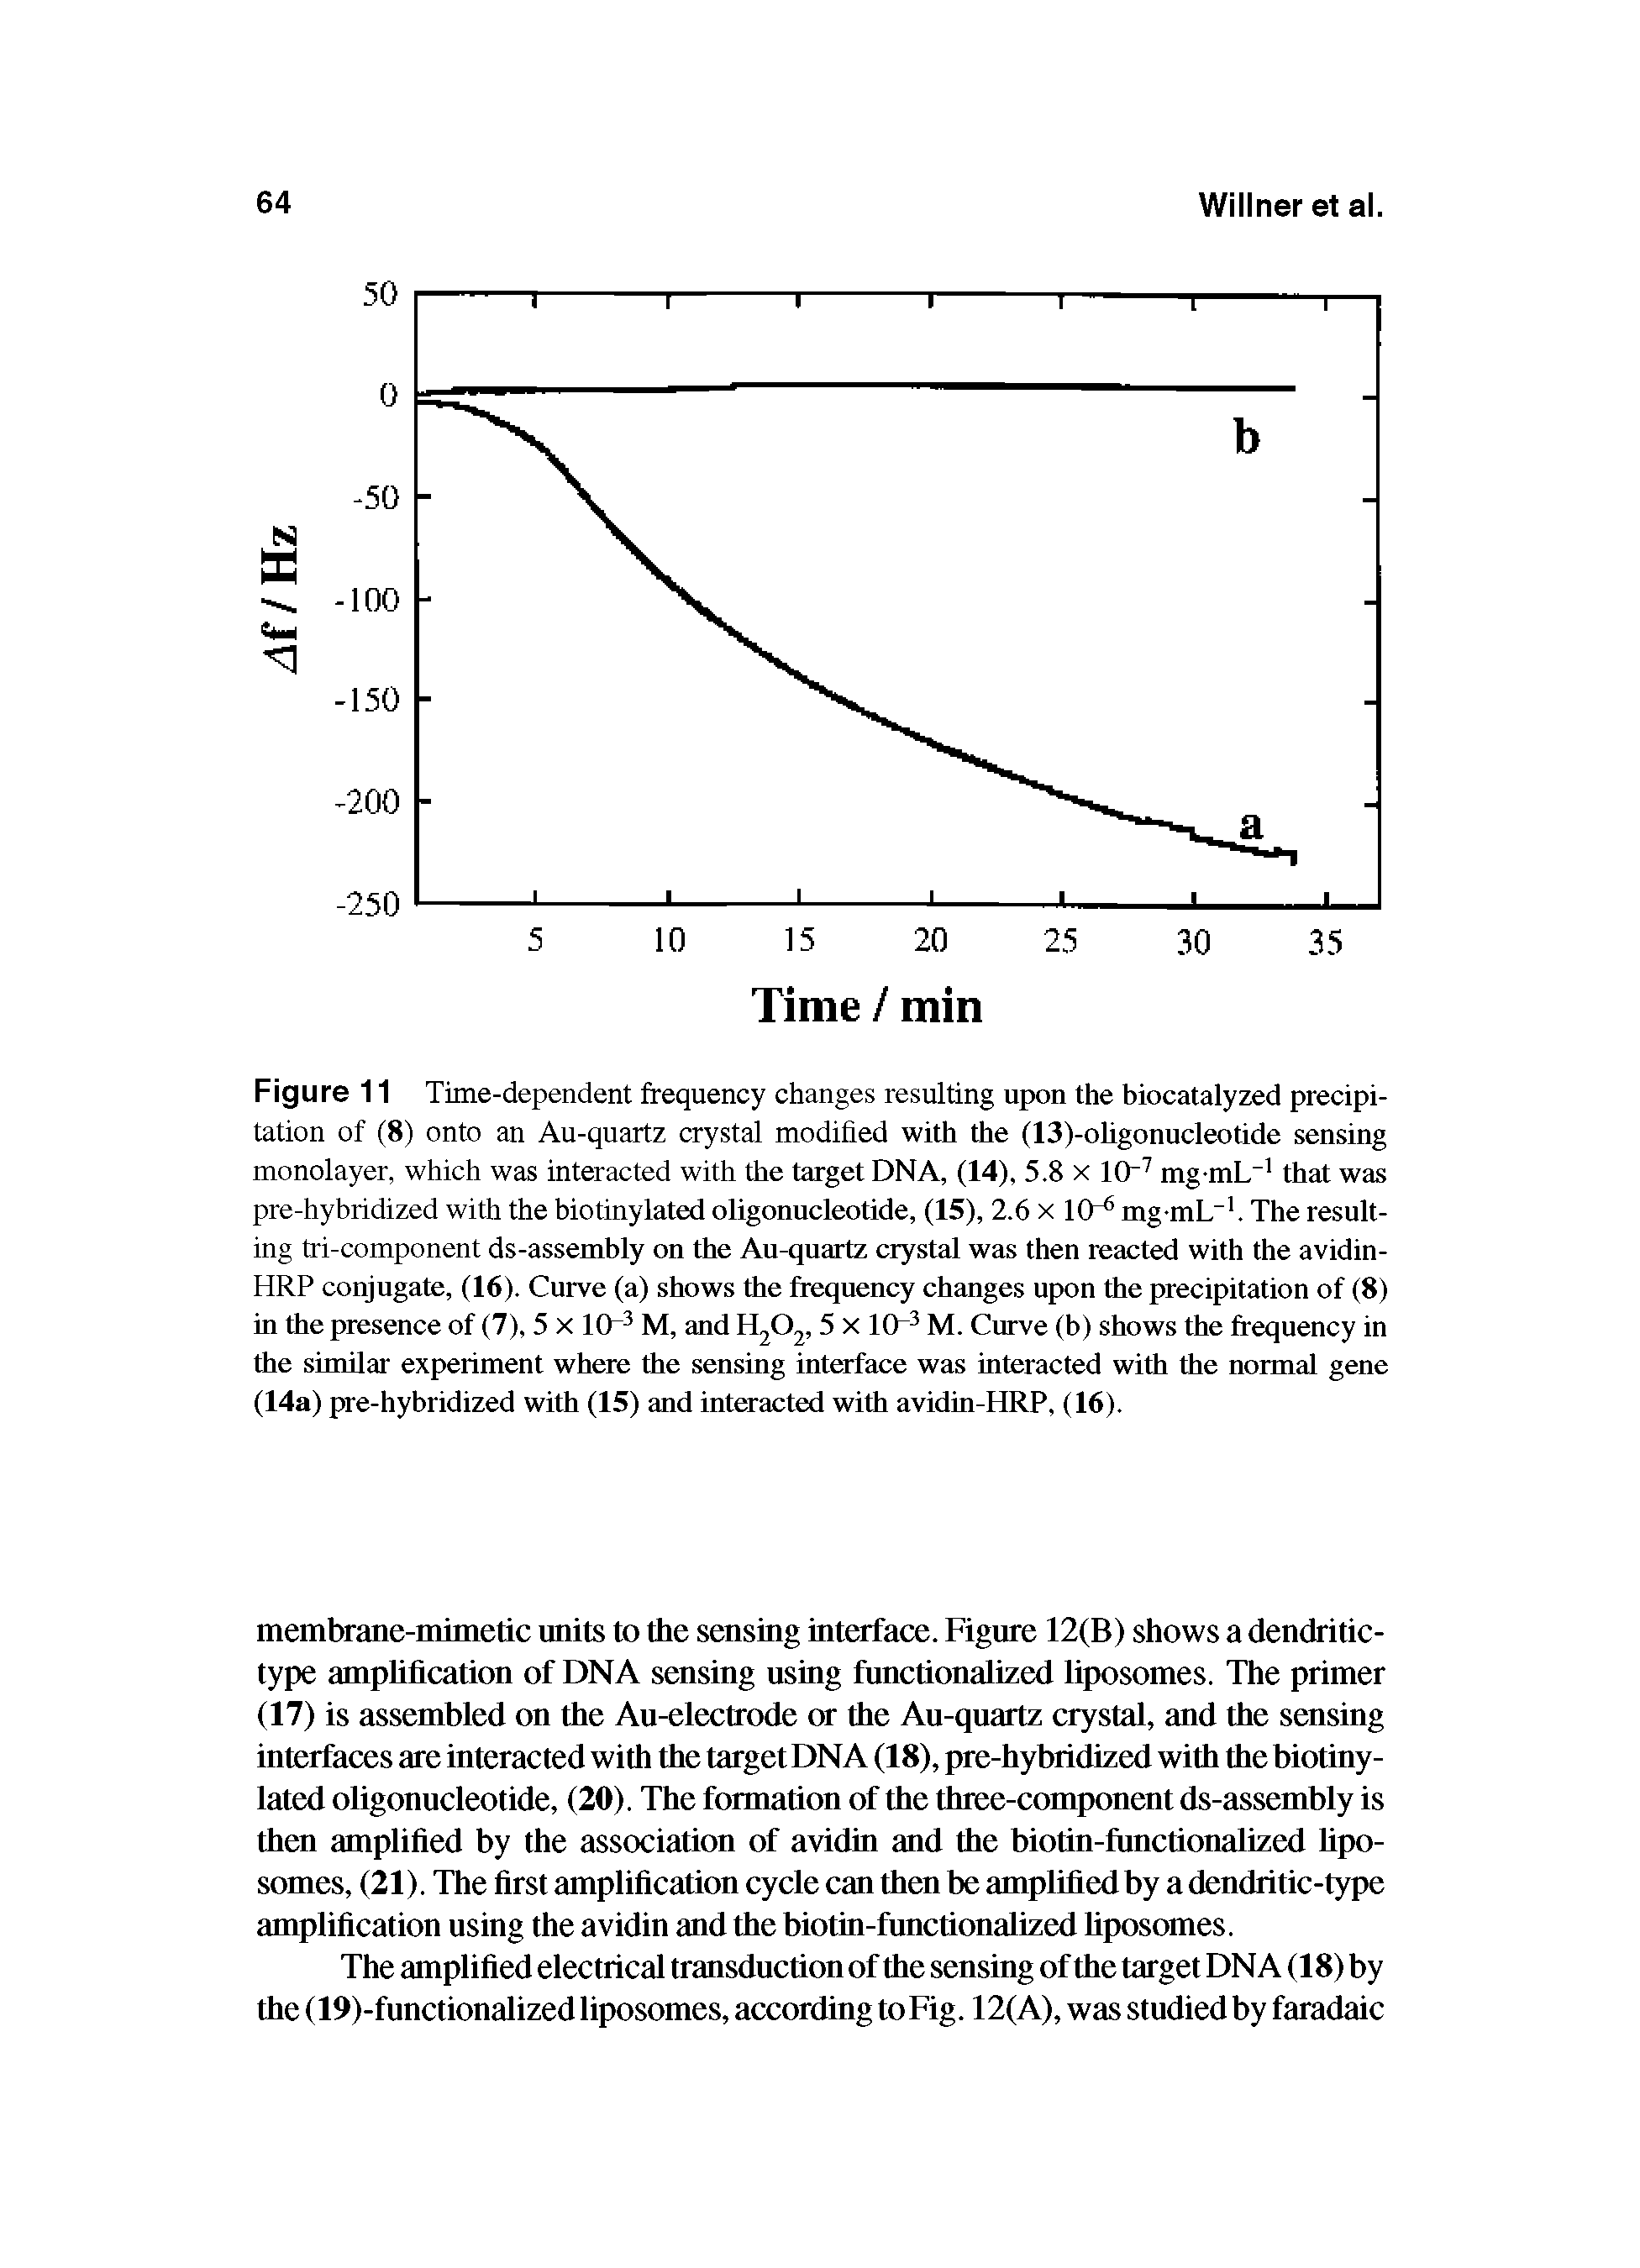 Figure 11 Time-dependent frequency changes resulting upon the biocatalyzed precipitation of (8) onto an Au-quartz crystal modified with the (13)-oligonucleotide sensing monolayer, which was interacted with the target DNA, (14), 5.8 x 10- mg-mL that was pre-hybridized with the biotinylated oligonucleotide, (15), 2.6 x IQ- mg-mL . The resulting tri-component ds-assembly on the Au-quartz crystal was then reacted with the avidin-HRP conjugate, (16). Curve (a) shows the frequency changes upon the precipitation of (8) in the presence of (7), 5 x lO 5 x IQ- M. Curve (b) shows the frequency in...